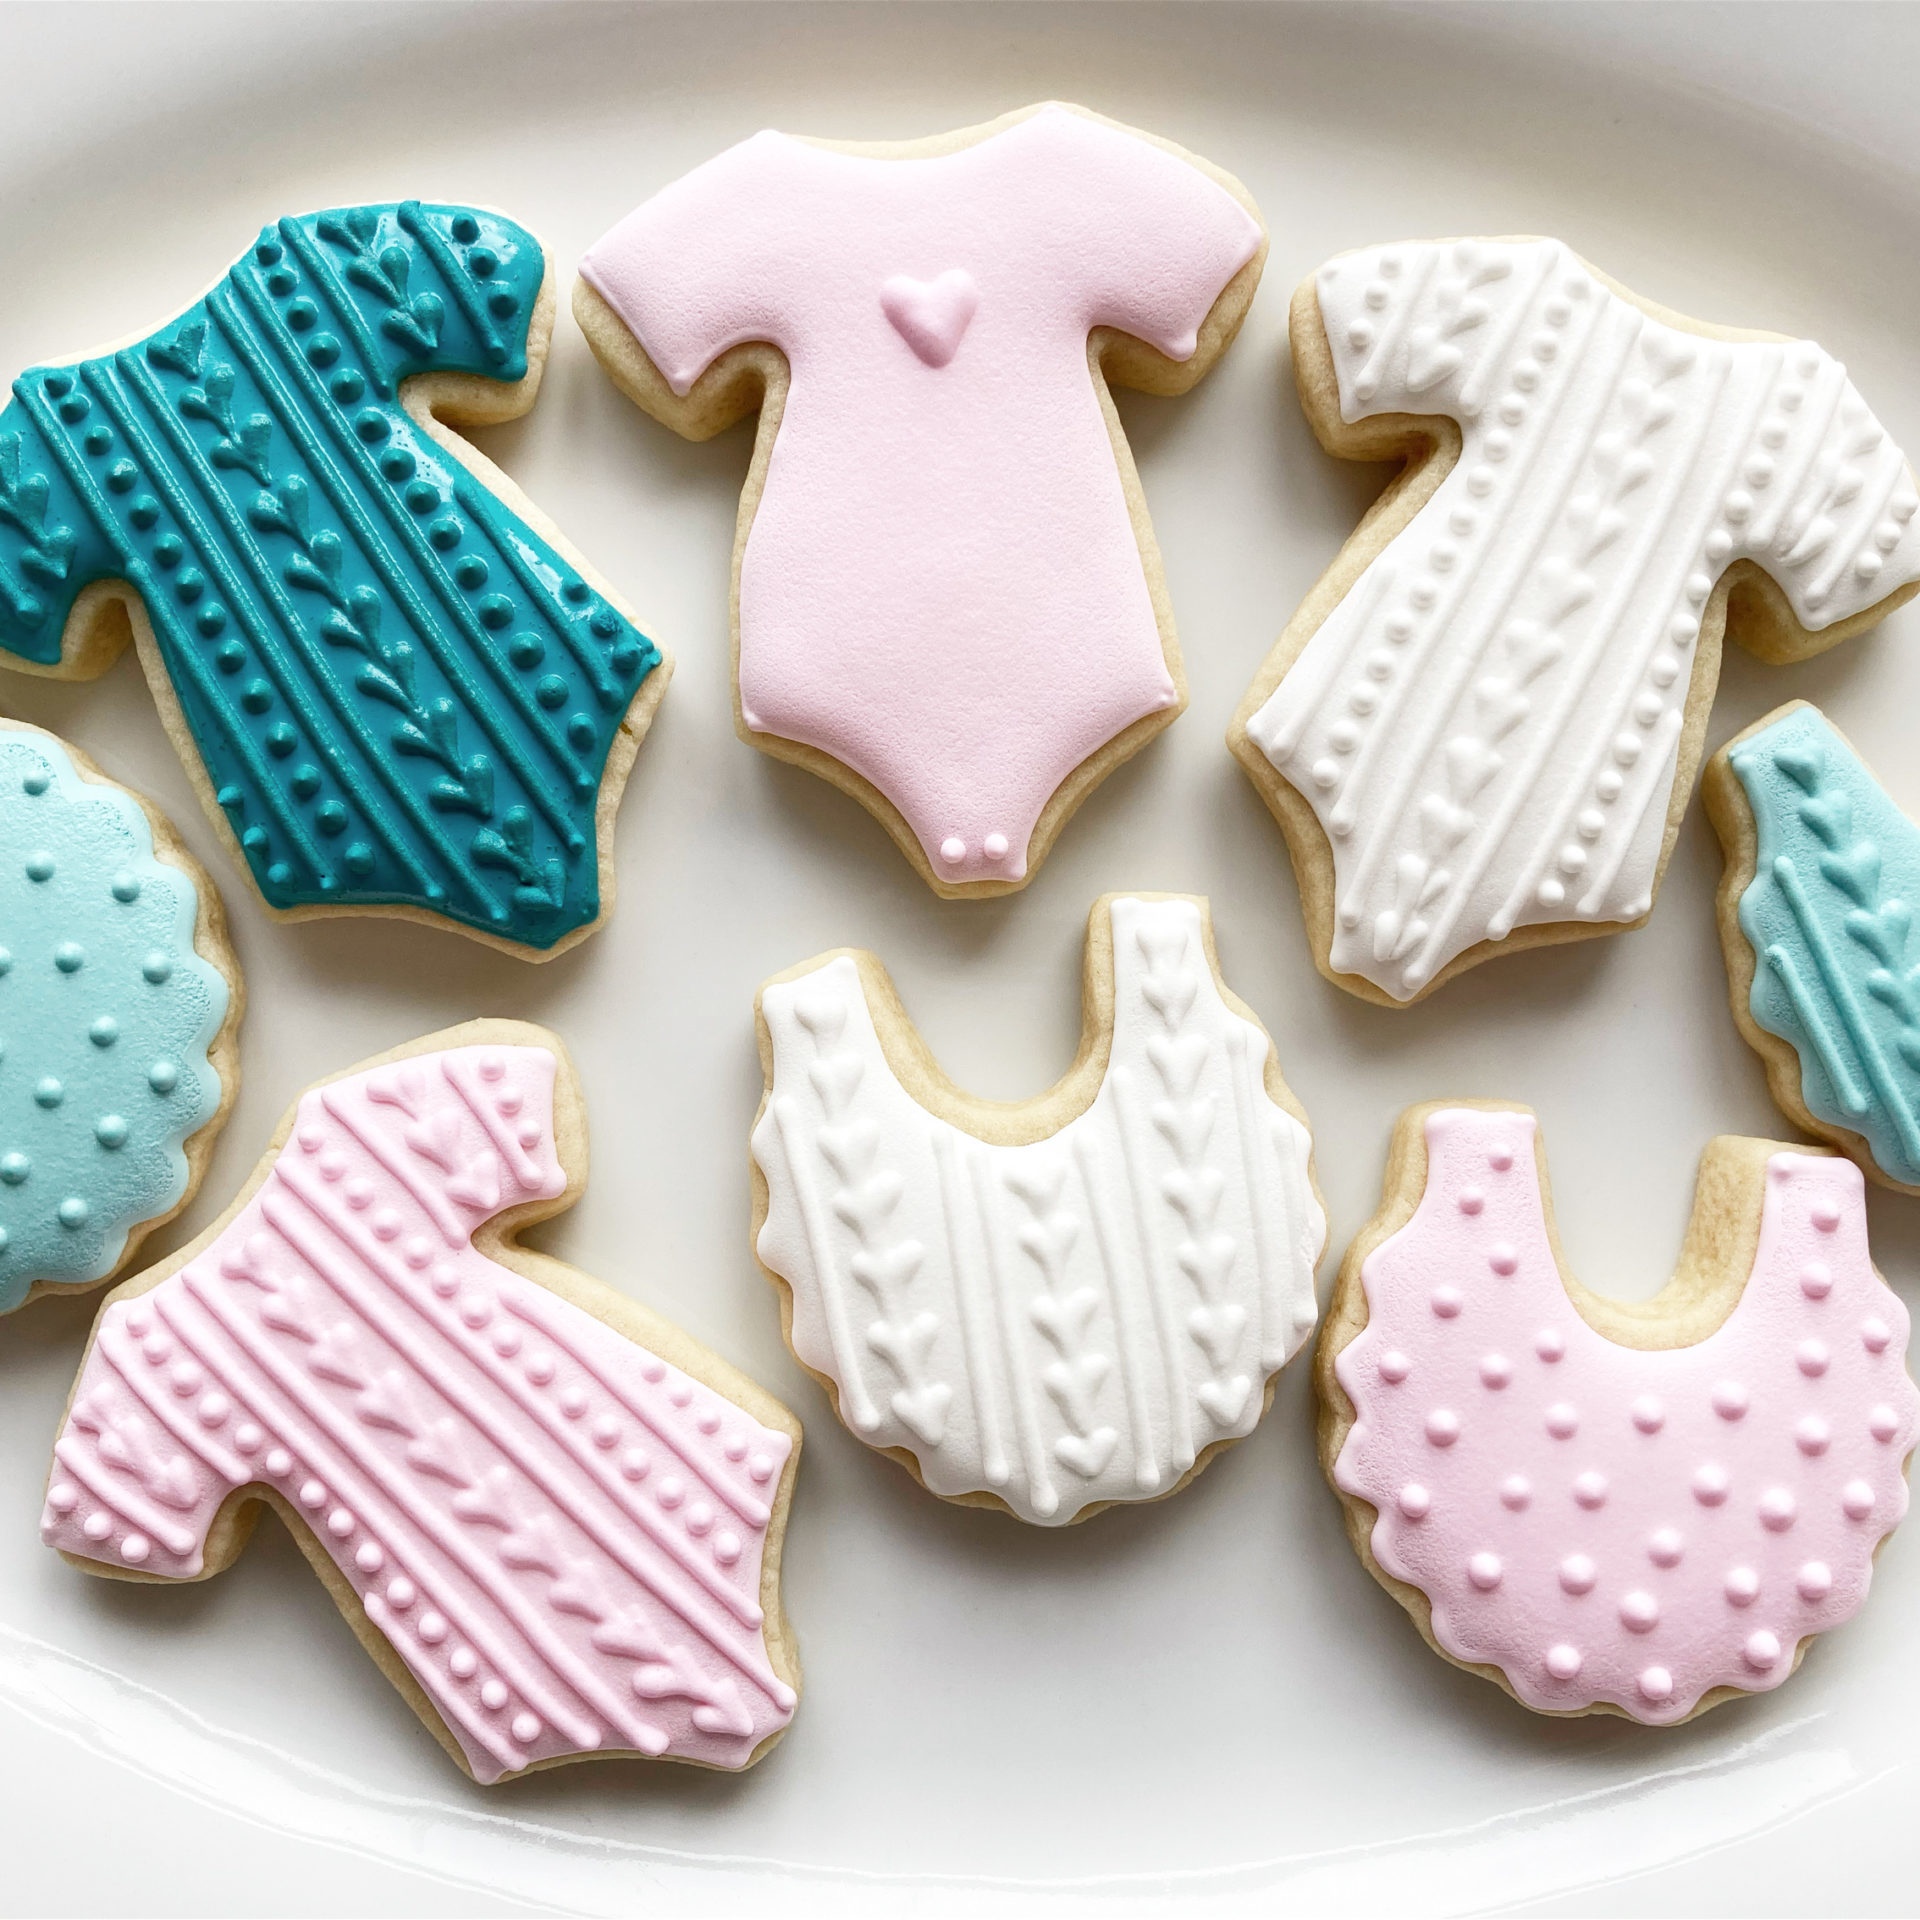 Baby shower royal icing cookies in the winter